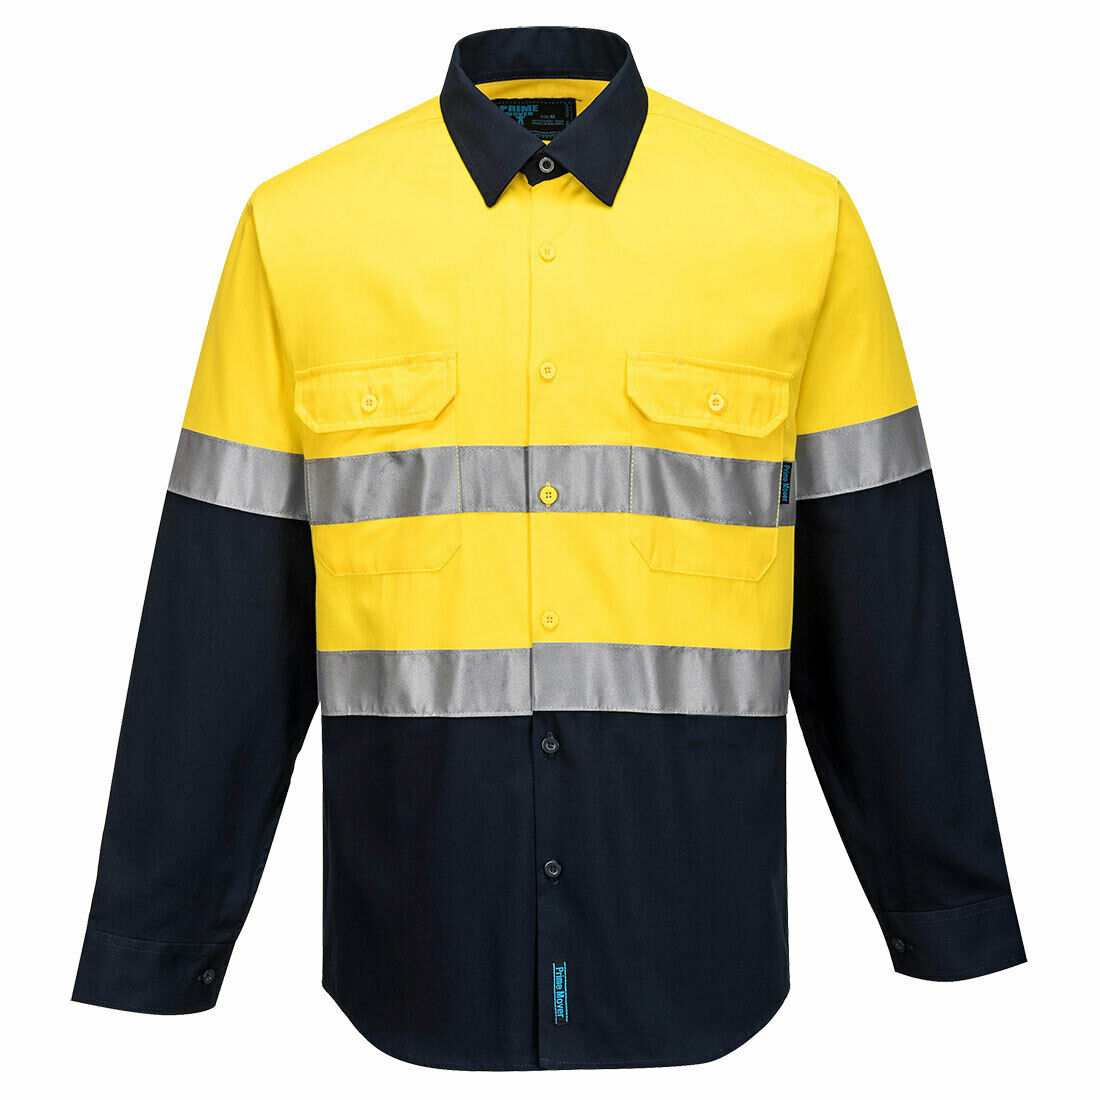 Portwest Mens Prime Mover Work Hi-Vis Two Cotton Reflective Shirt Taped MA101-Collins Clothing Co